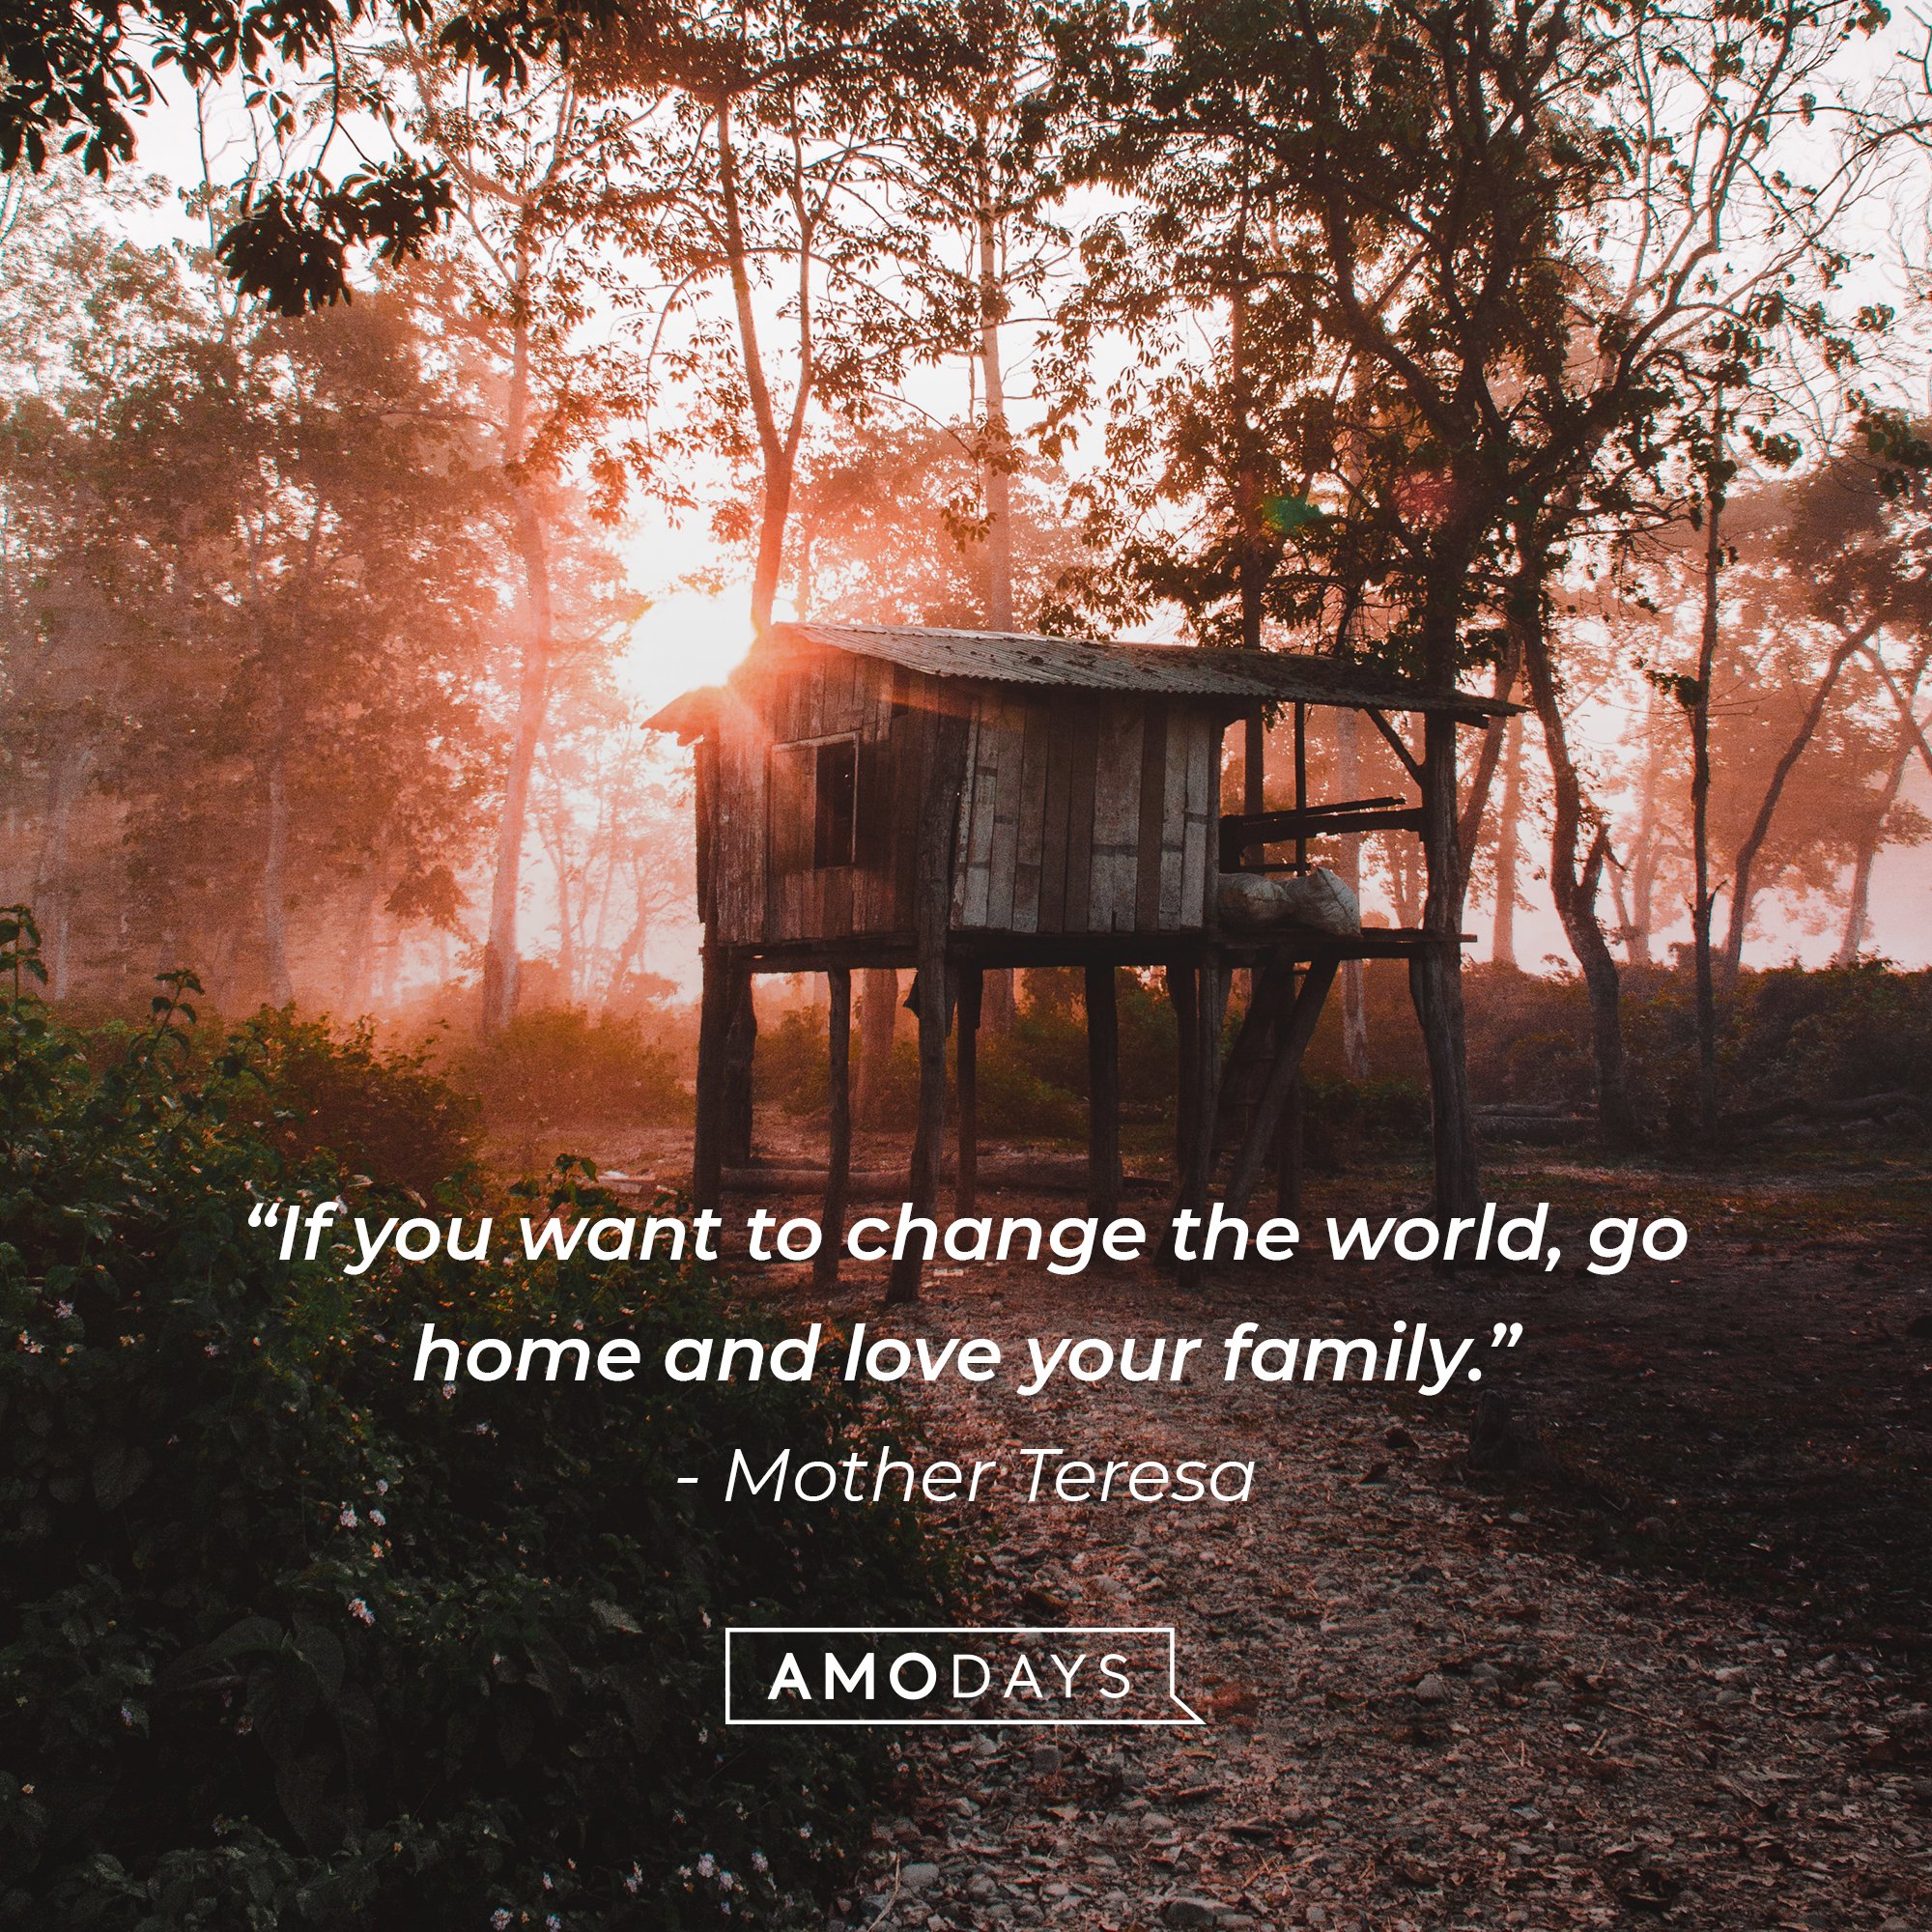 Mother Teresa's quote: “If you want to change the world, go home and love your family.” | Image: AmoDays